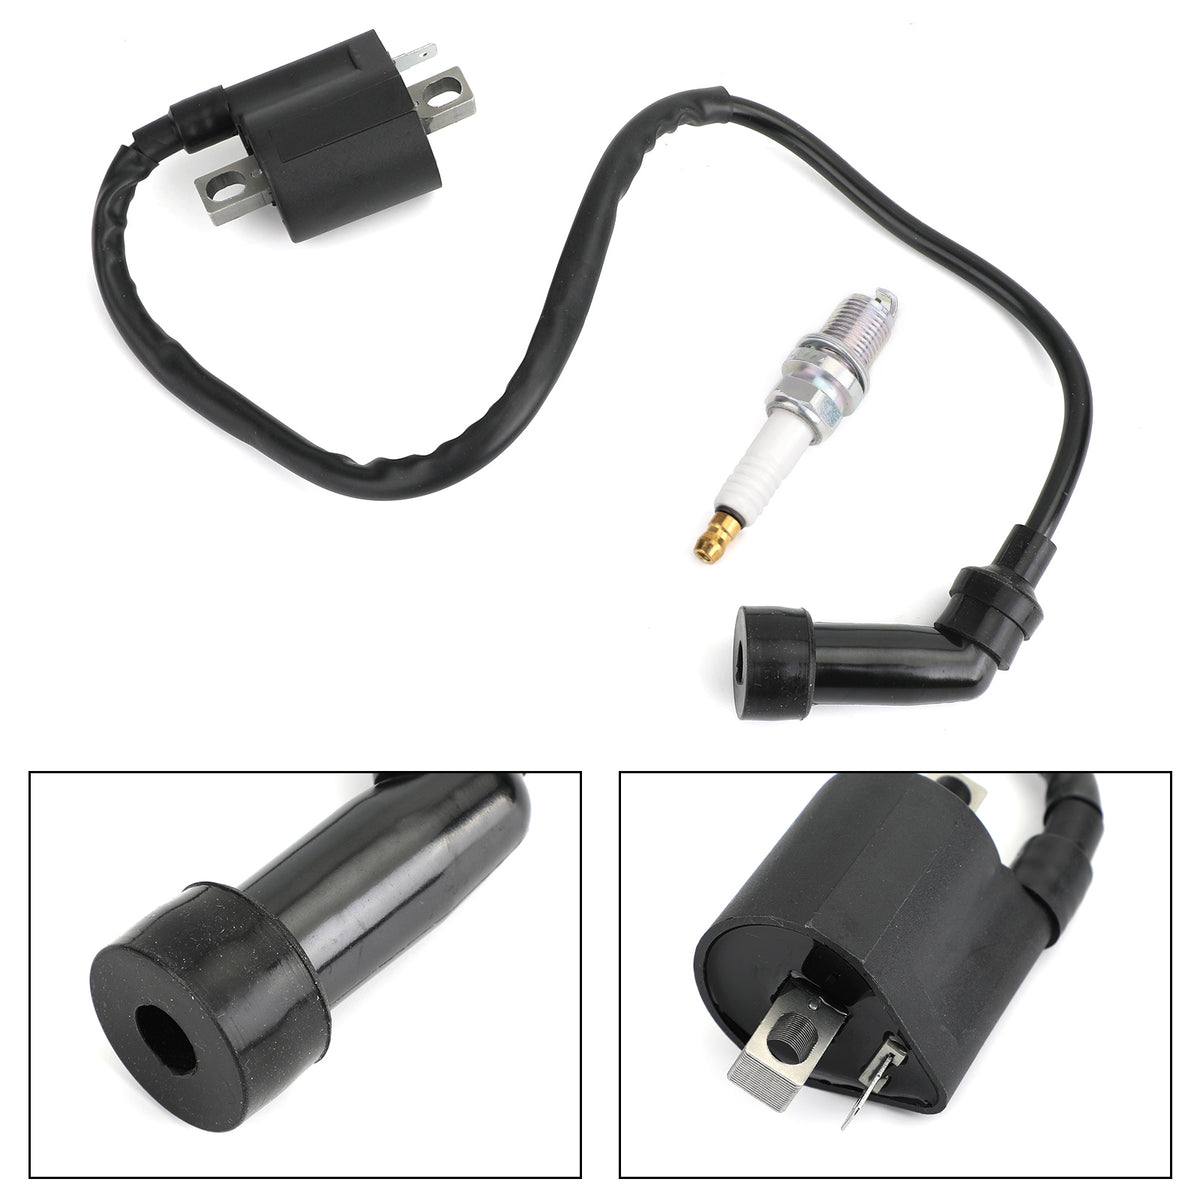 Ignition Coil + Spark Plug fit for Polaris ATV Trail Boss 325 330 31401-40F00